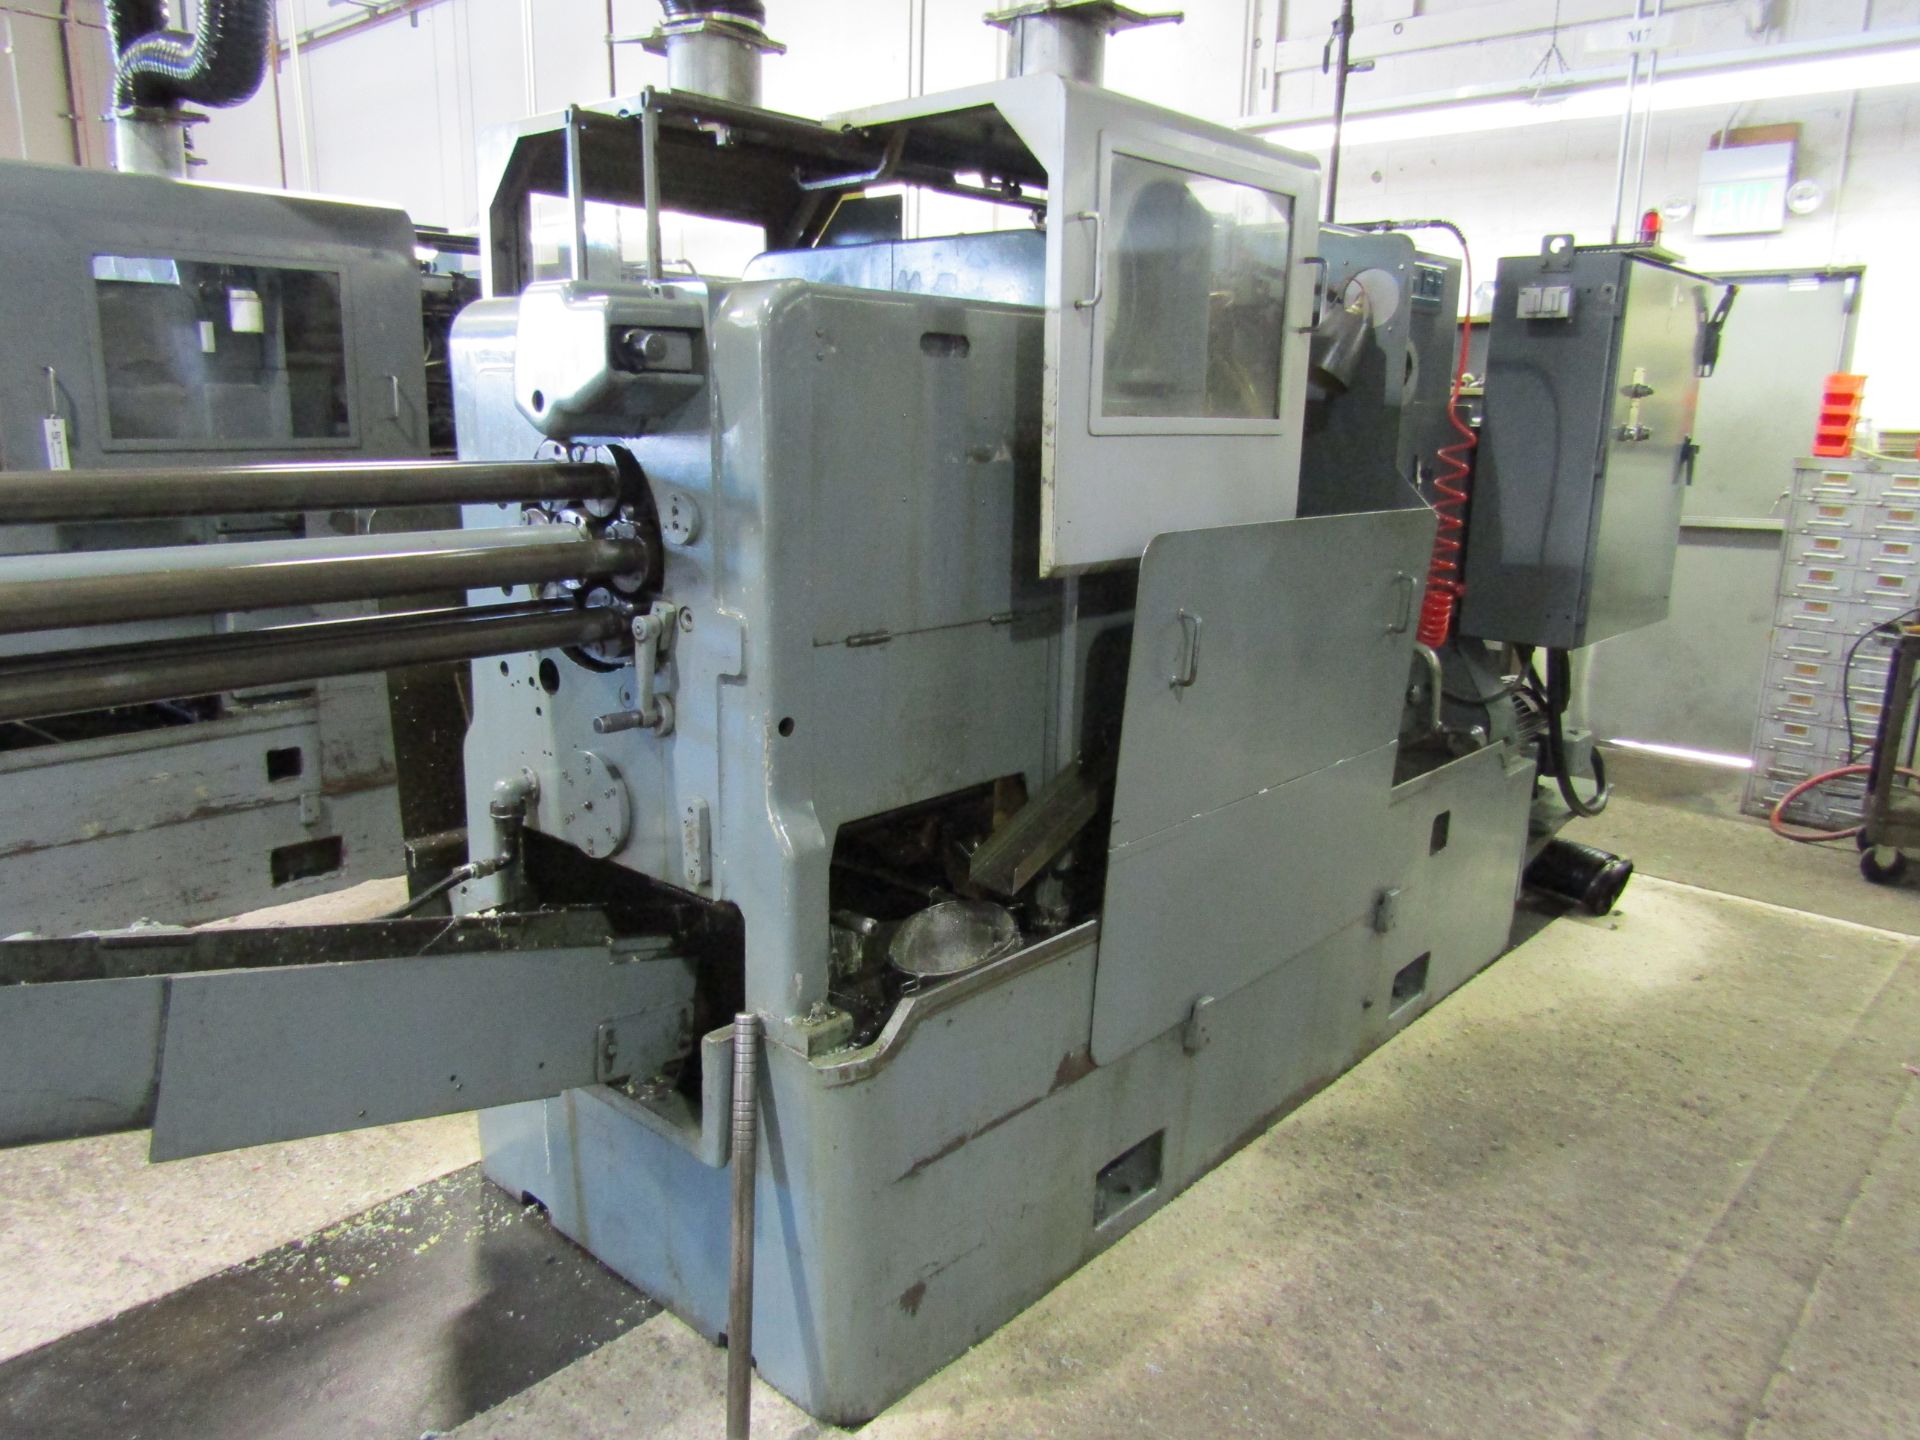 WICKMAN 6 SPINDLE AUTOMATIC SCREW MACHINE, 1", INSPECTION 14916. LOT TO INCLUDE: ASSOCIATED - Image 7 of 9